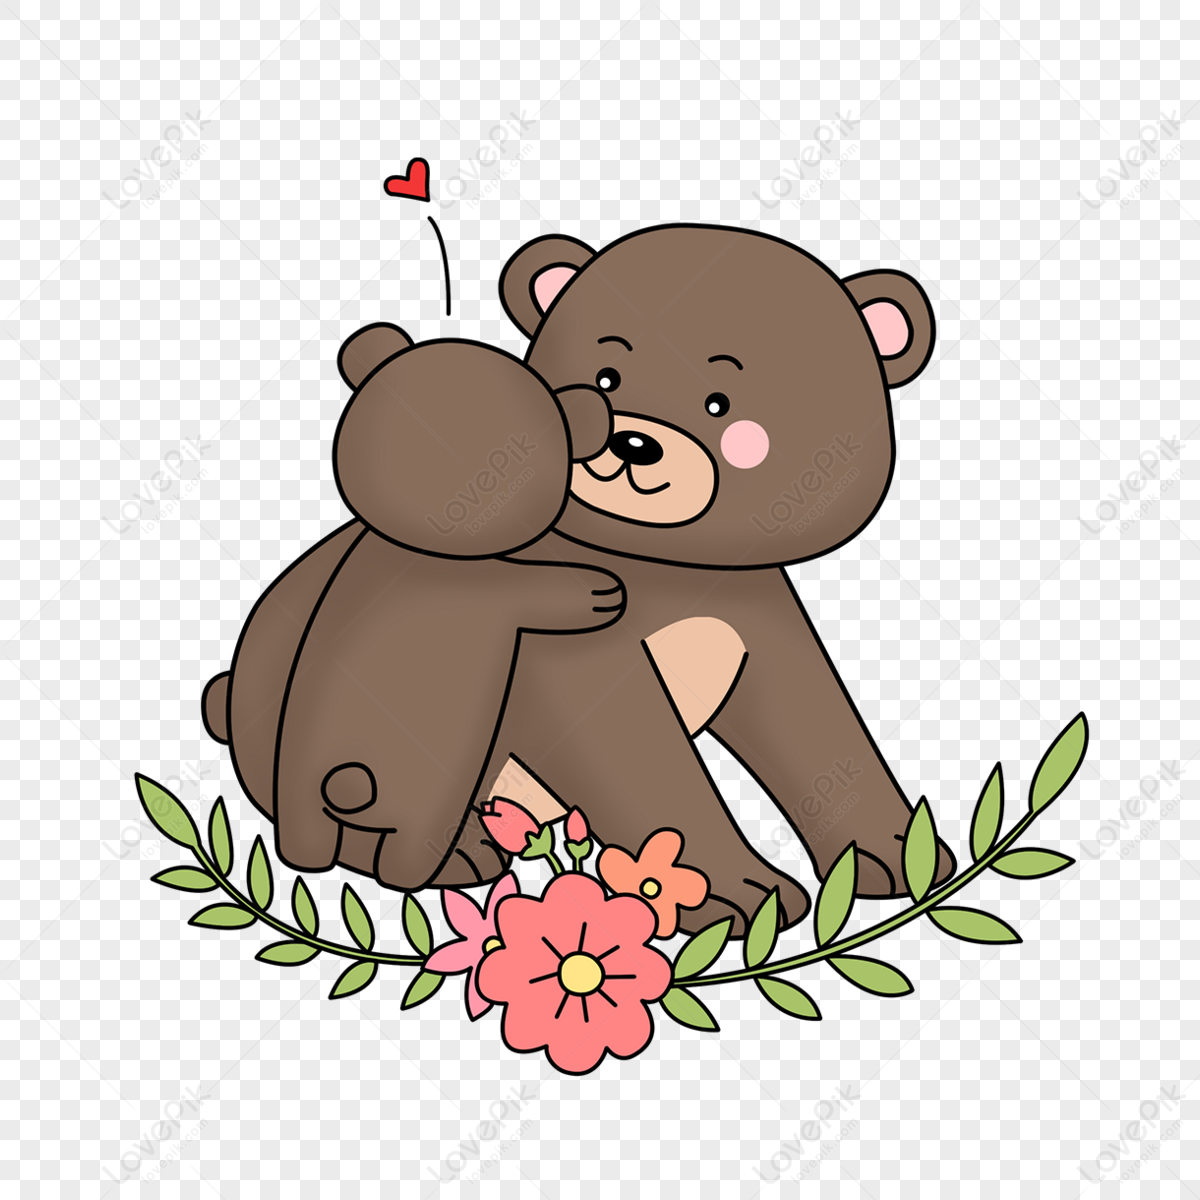 Bear holds big bear to pass love animal mother's day,toy,happy png transparent background